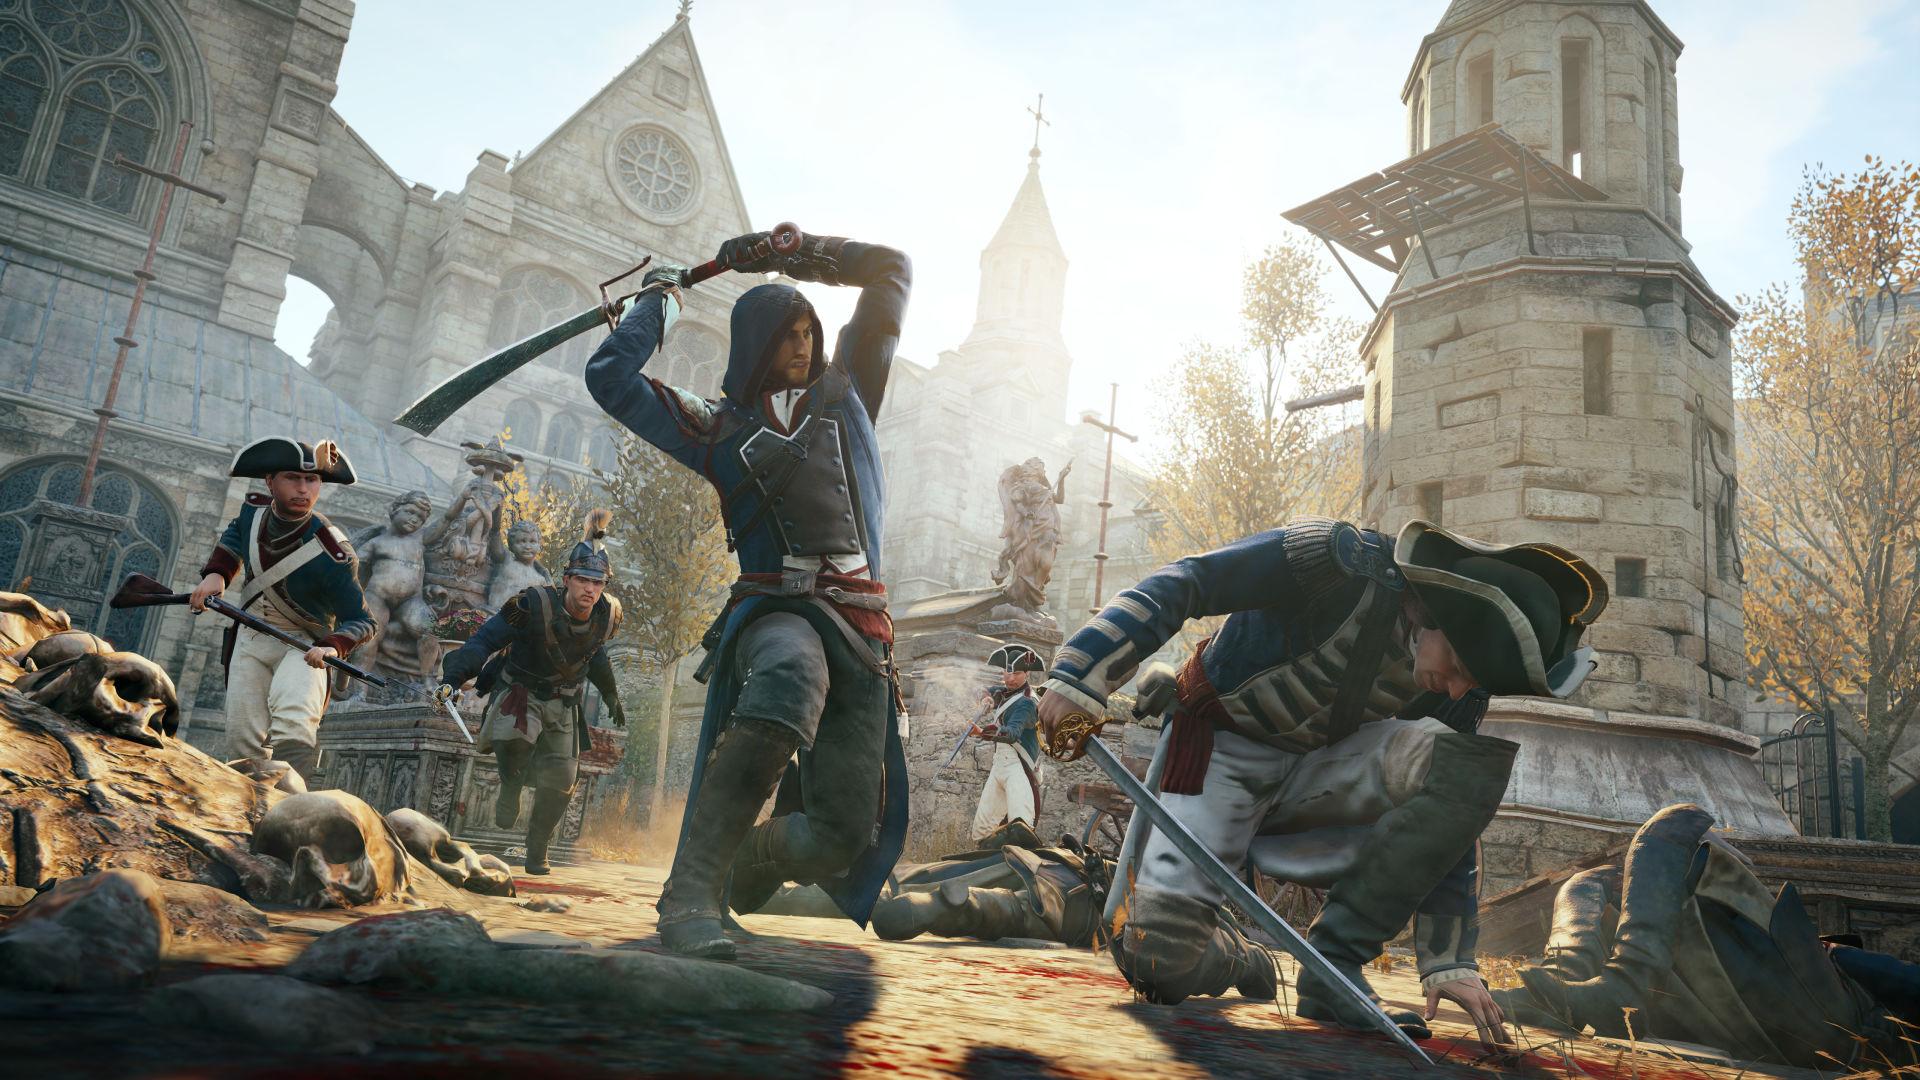 AC Unity Is The Worst Assassin's Creed, But Not For Why You Think